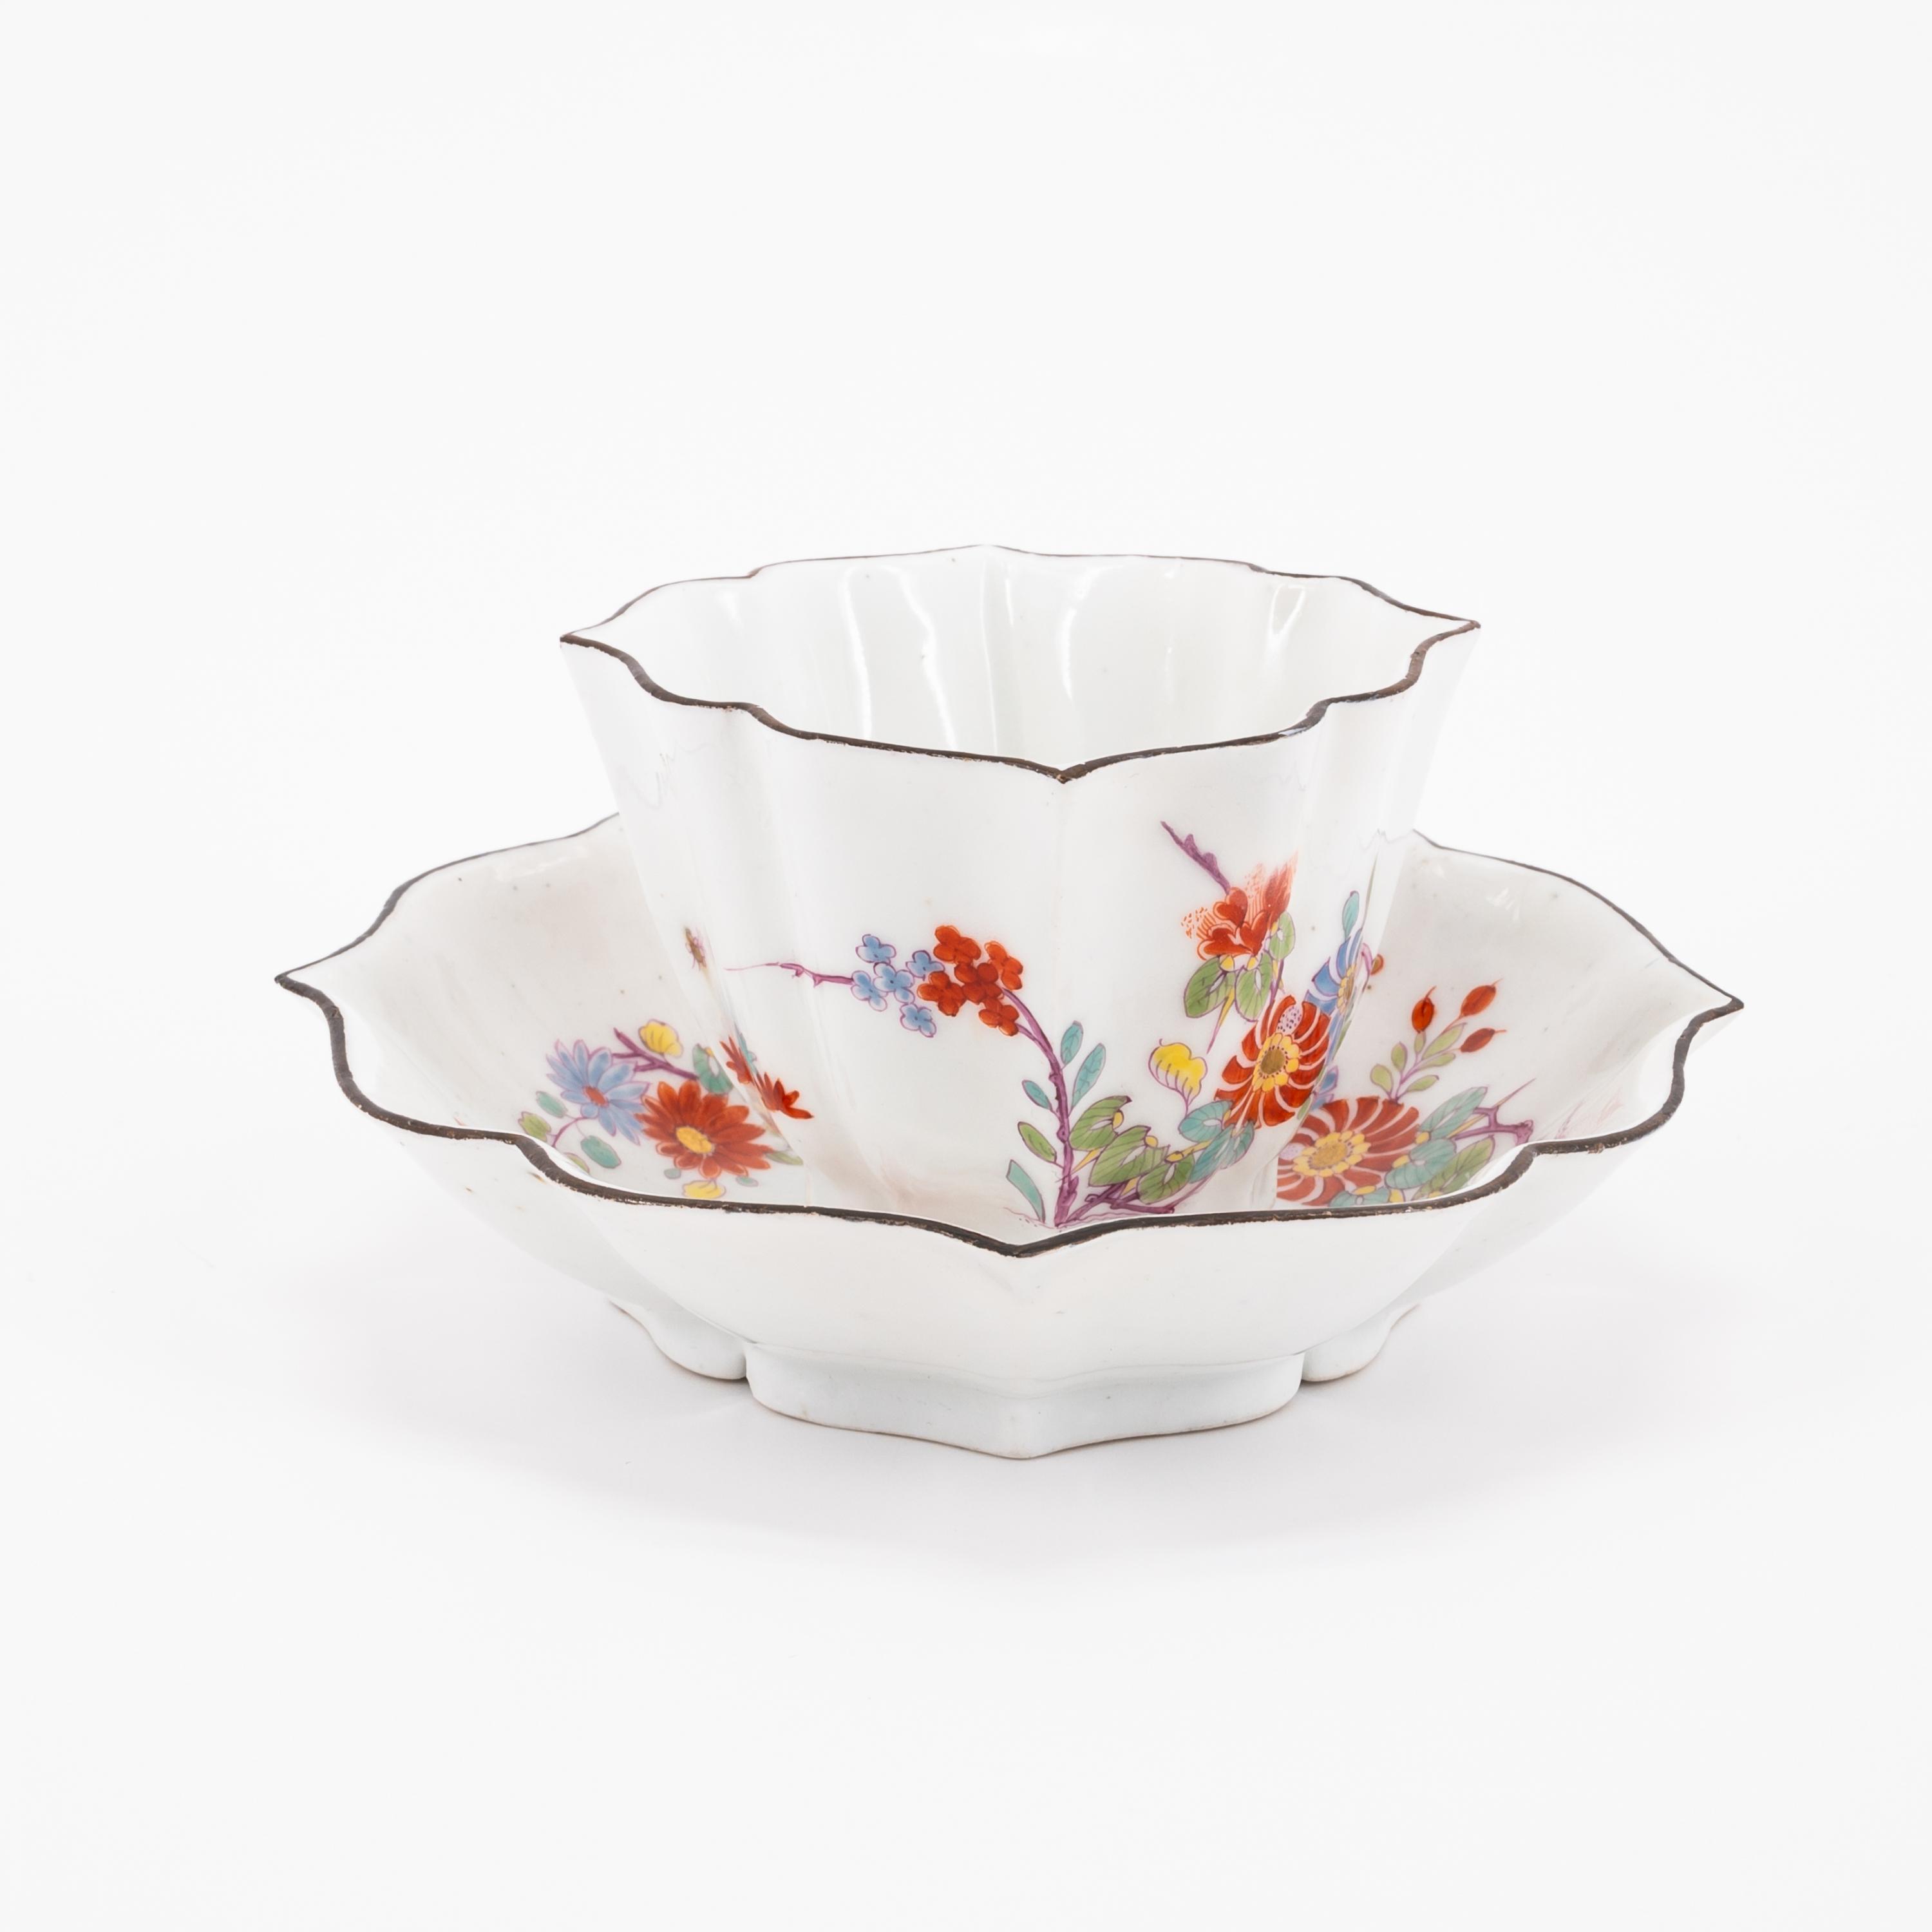 SCALLOPED PORCELAIN CUPS AND SAUCERS WITH KAKIEMON DECOR - Image 4 of 6